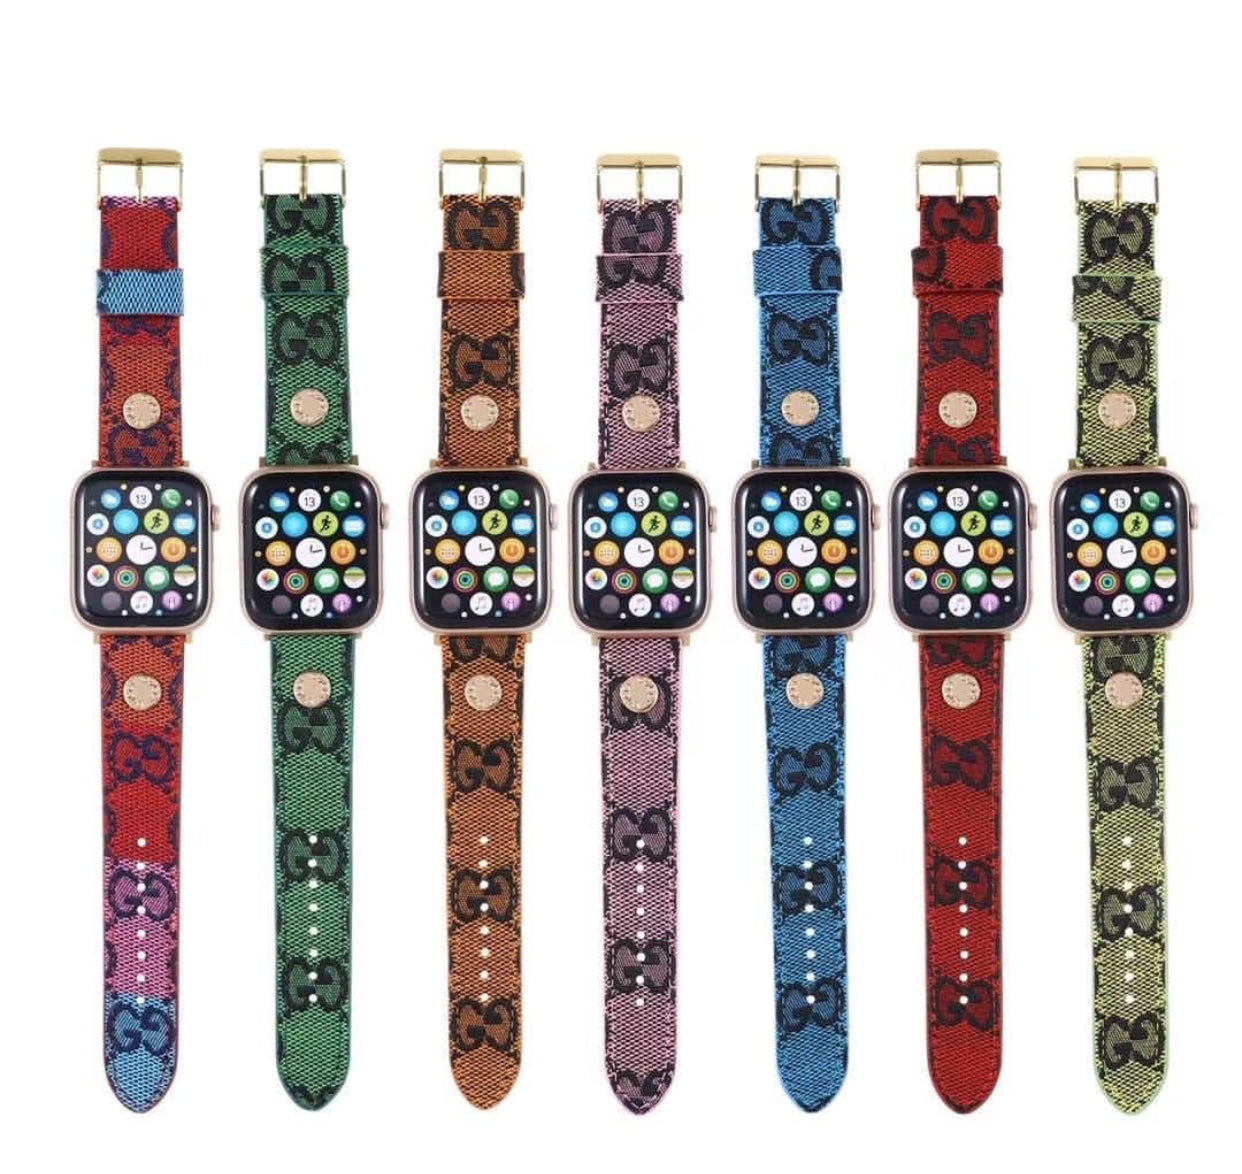 Watch Band GG Multicolor in 7 colors